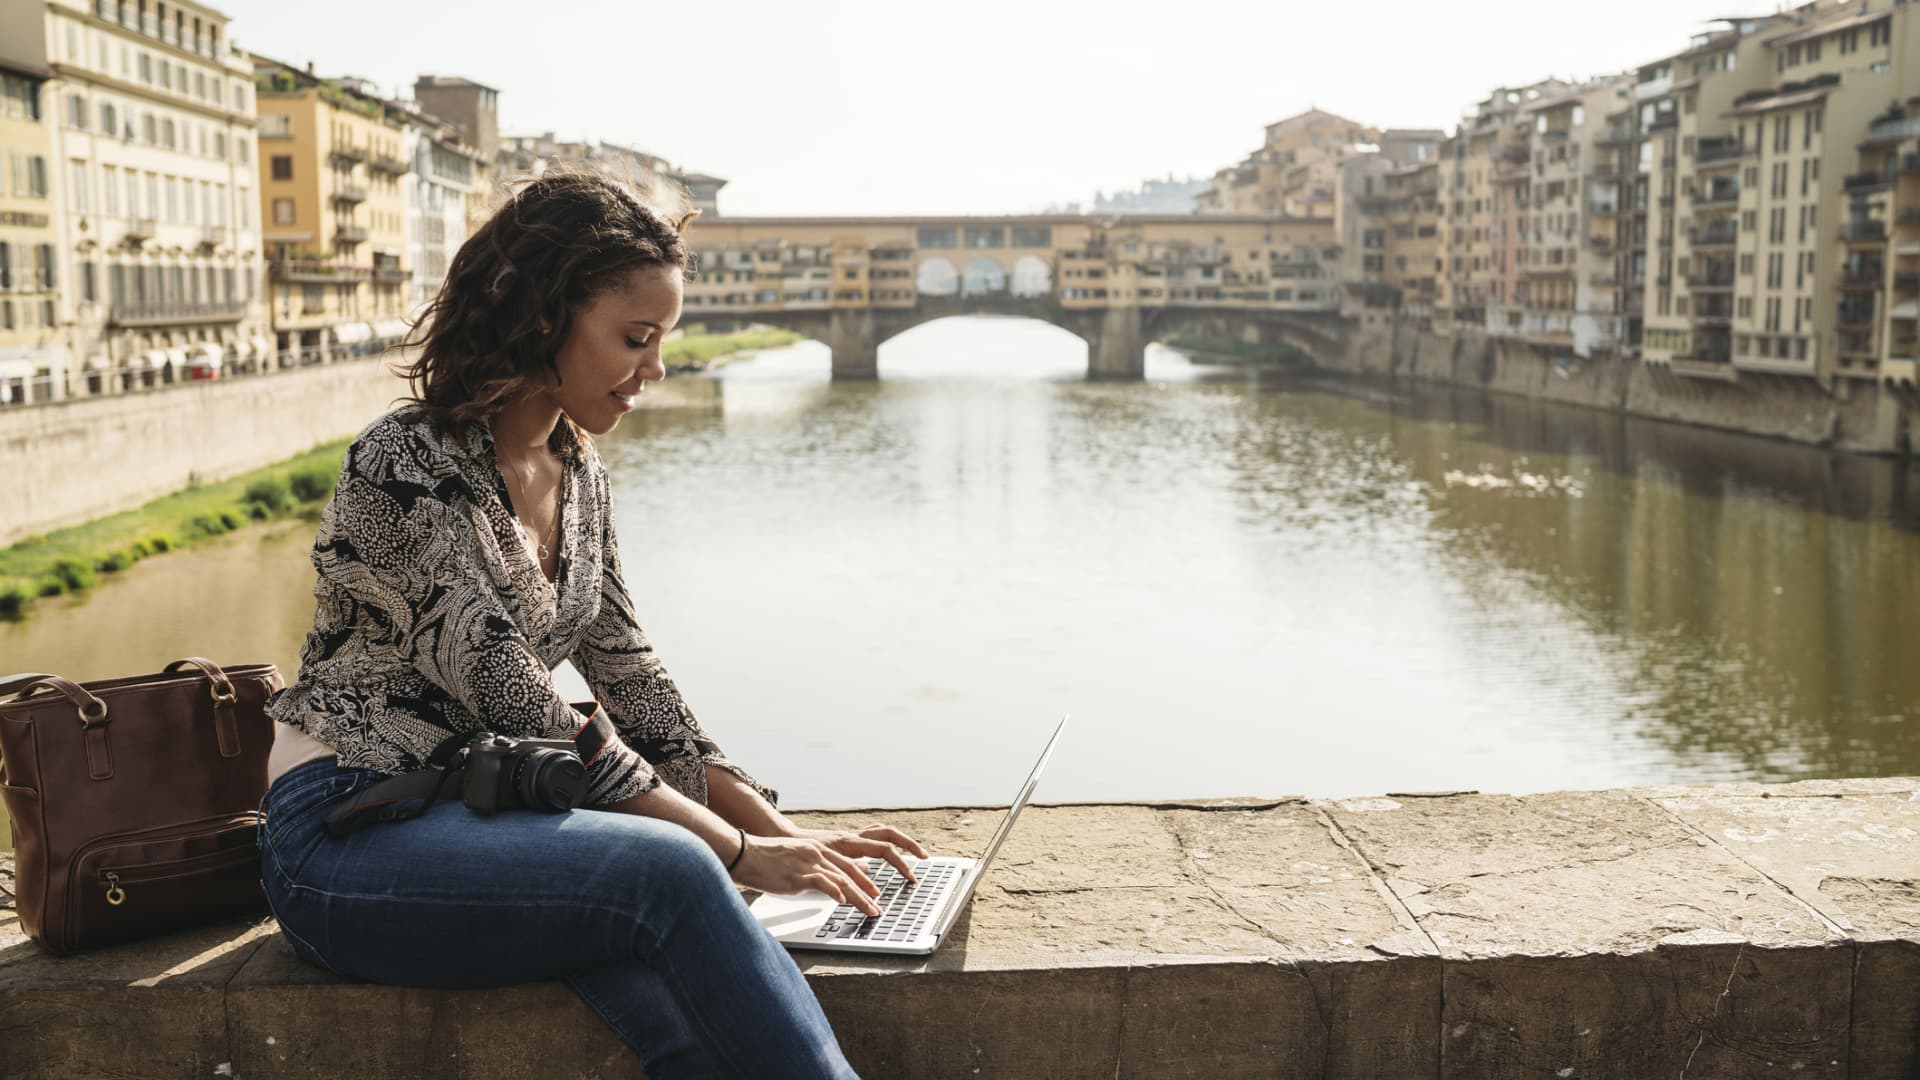 Italy launched a new digital nomad visa: How to apply [Video]